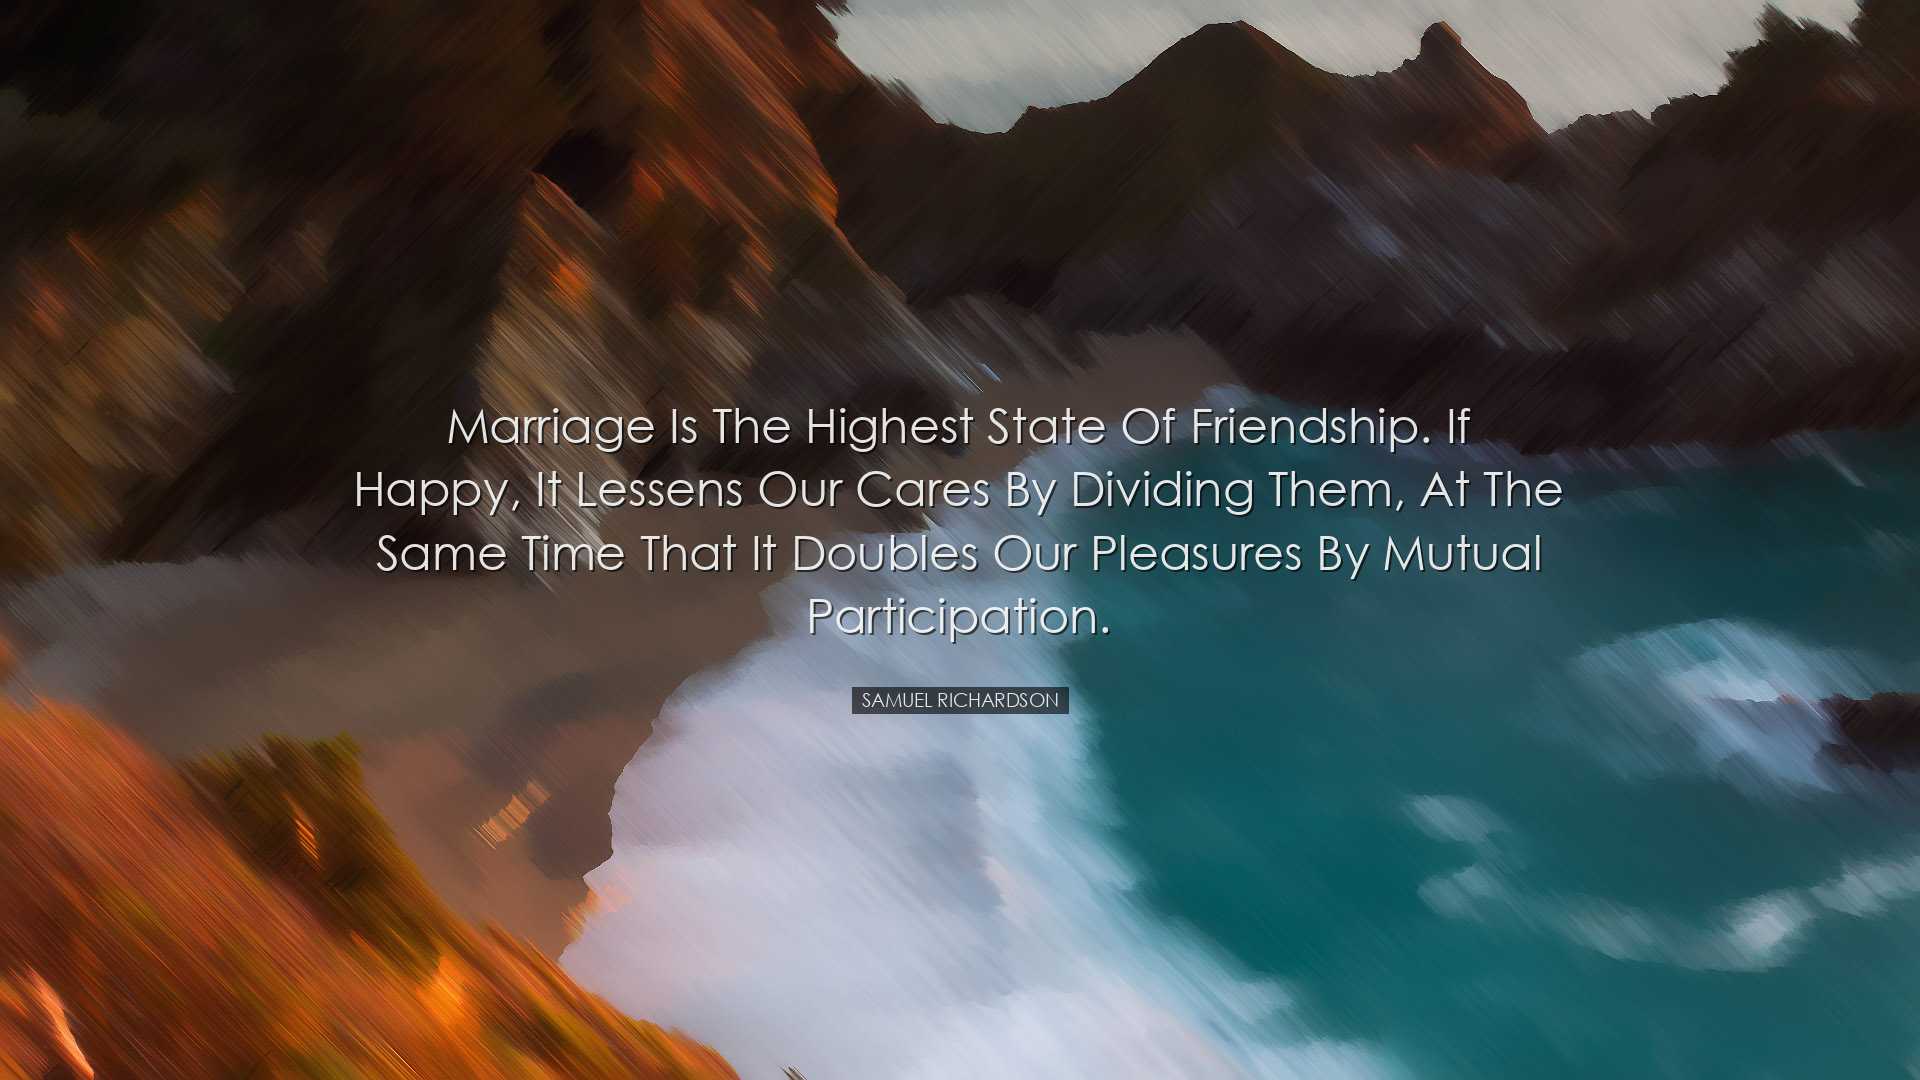 Marriage is the highest state of friendship. If happy, it lessens